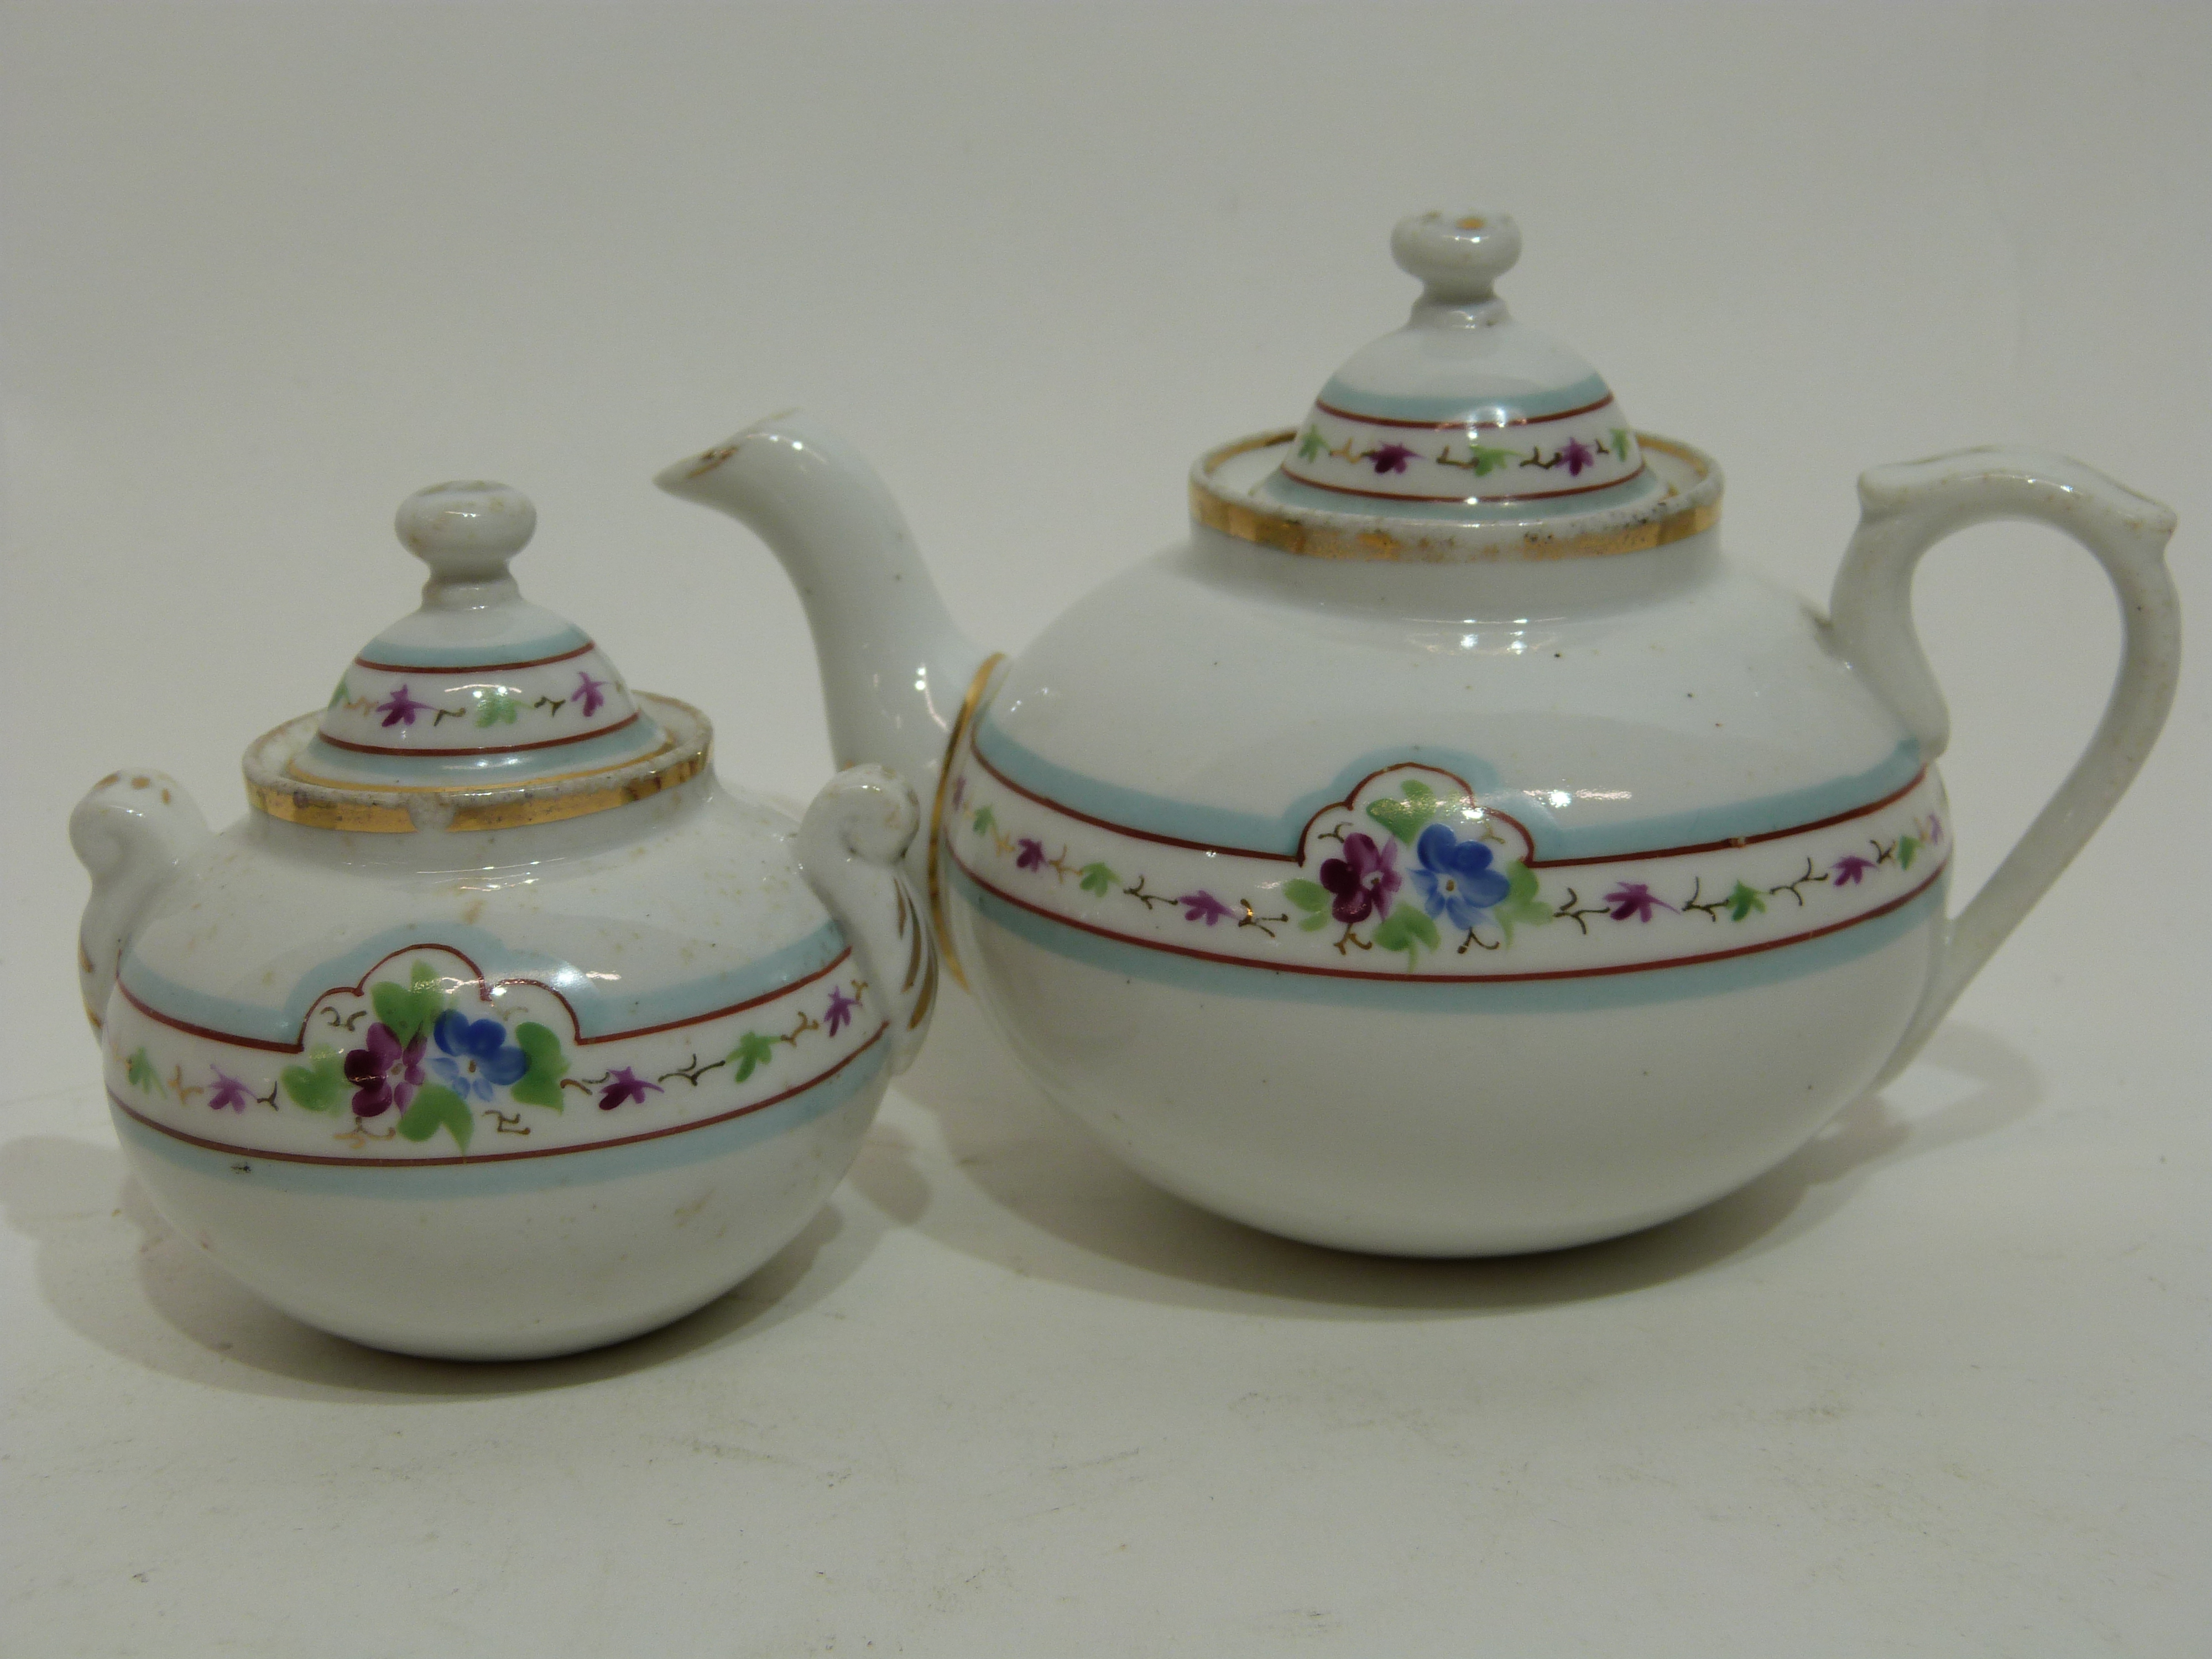 Miniature 19th century child's tea set comprising tea pot, sugar bowl and three cups and saucers - Image 4 of 4